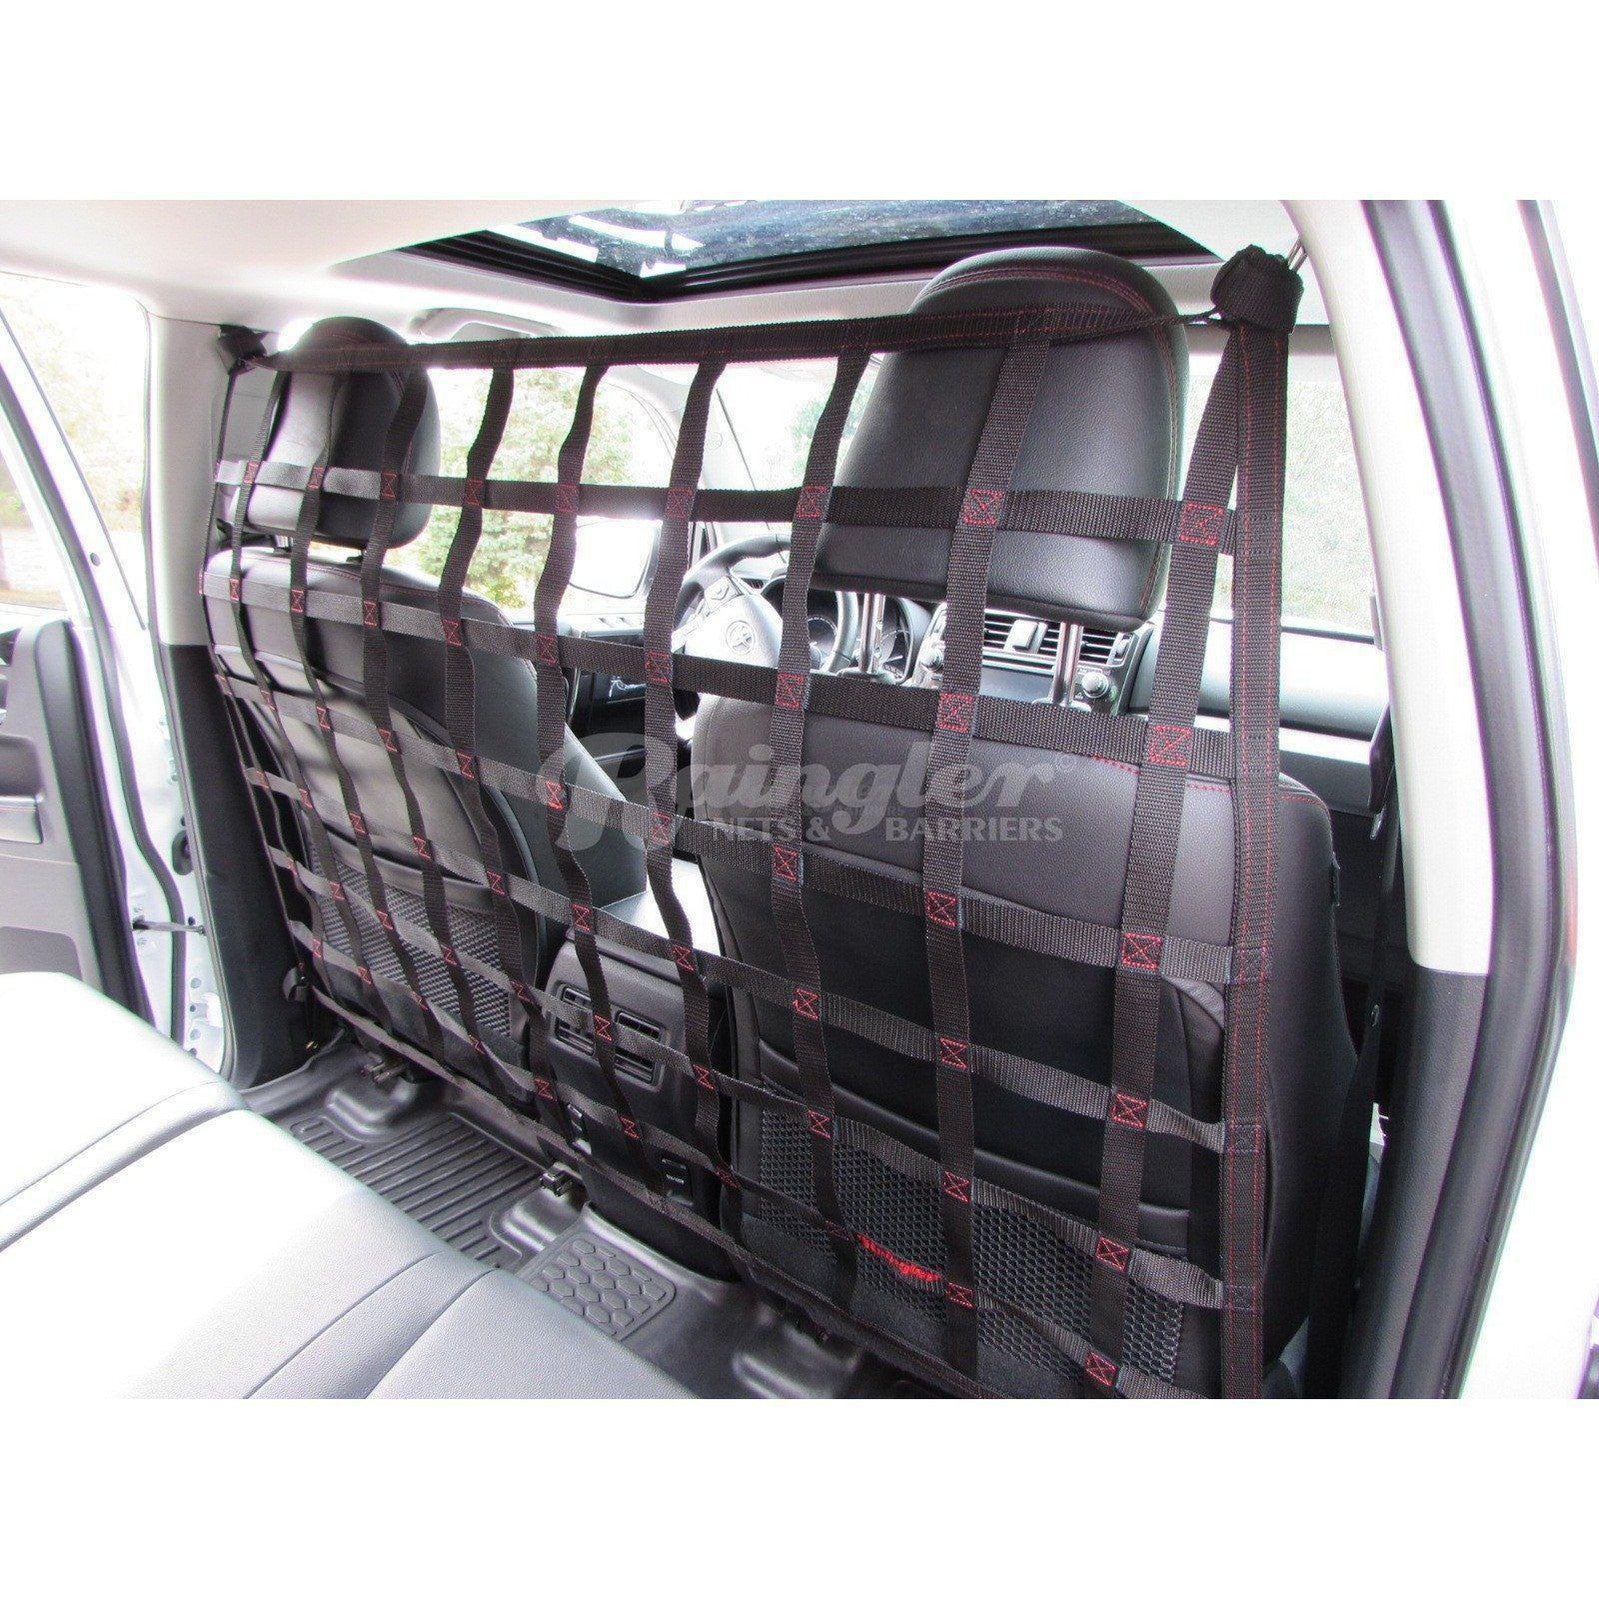 2018 - Newer Chevrolet Equinox Behind Front Seats Barrier Divider Net - Extended Version